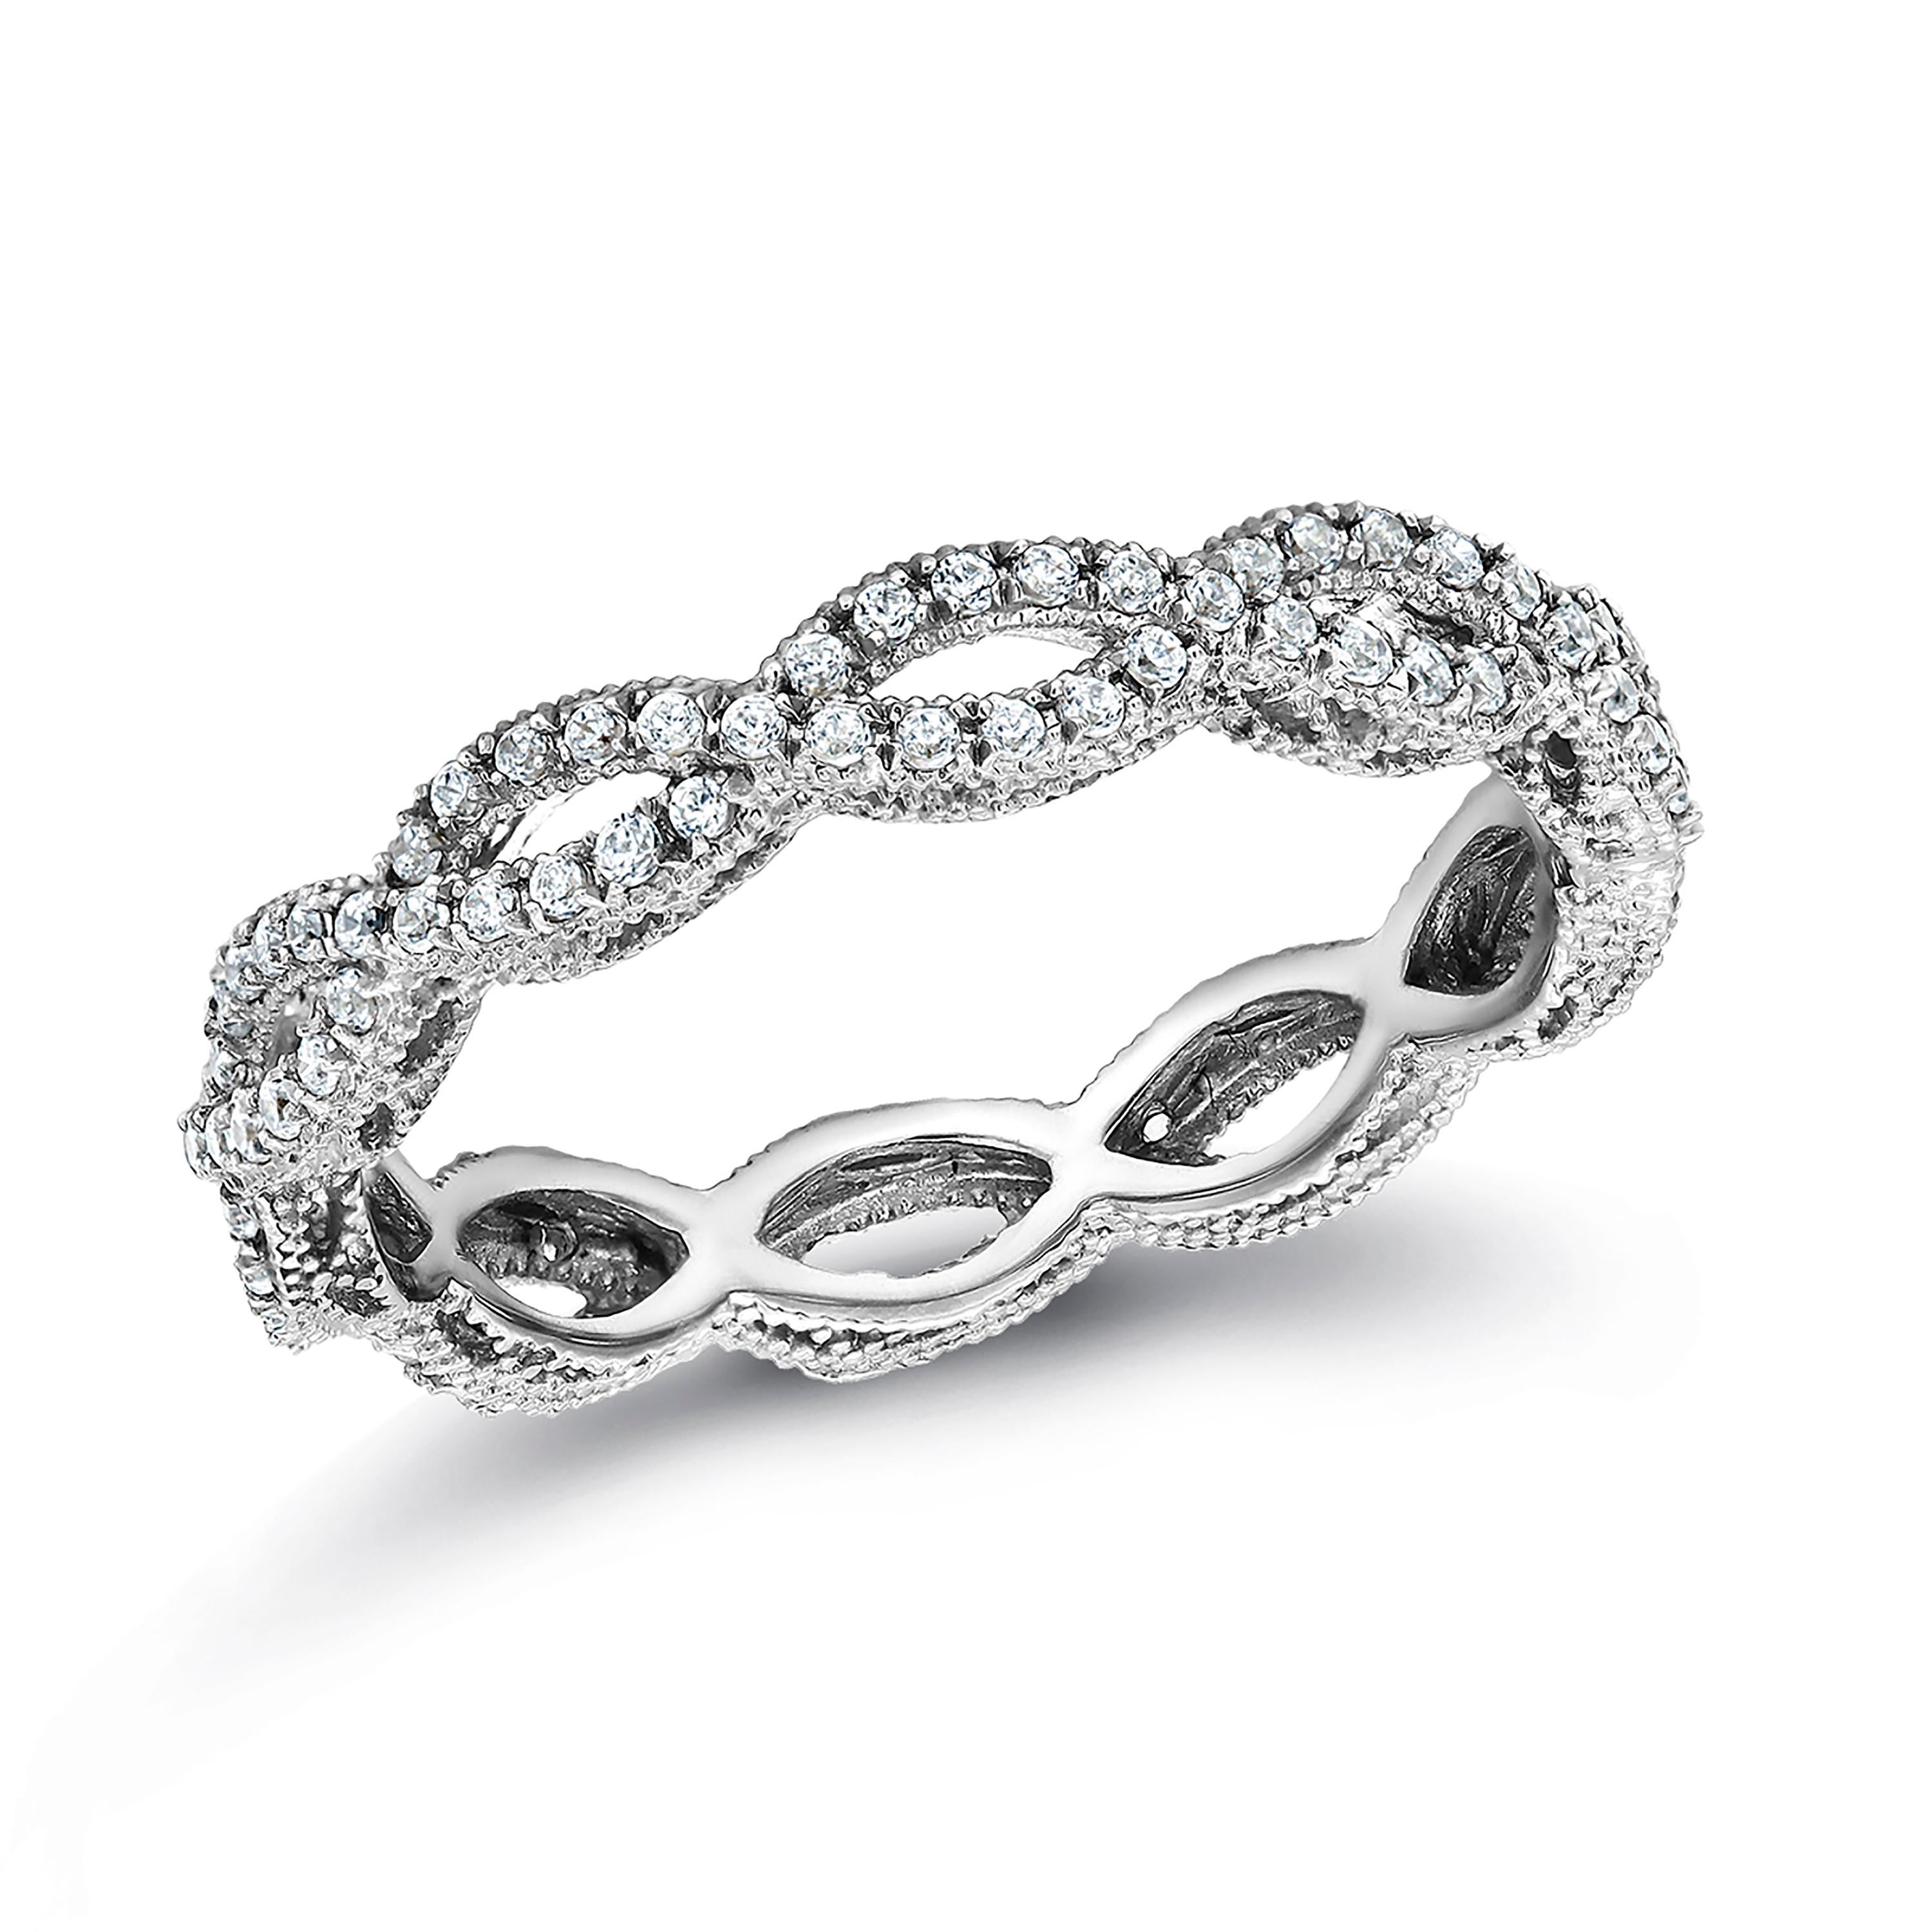 18 Karat white gold micro pave diamond band
Vintage style intertwining twisted band 
Total diamond weight of 1.20 carat
Made to order in special size
Two to three weeks delivery 
New Ring
Available in full finger ring, half finger sizes, and quarter